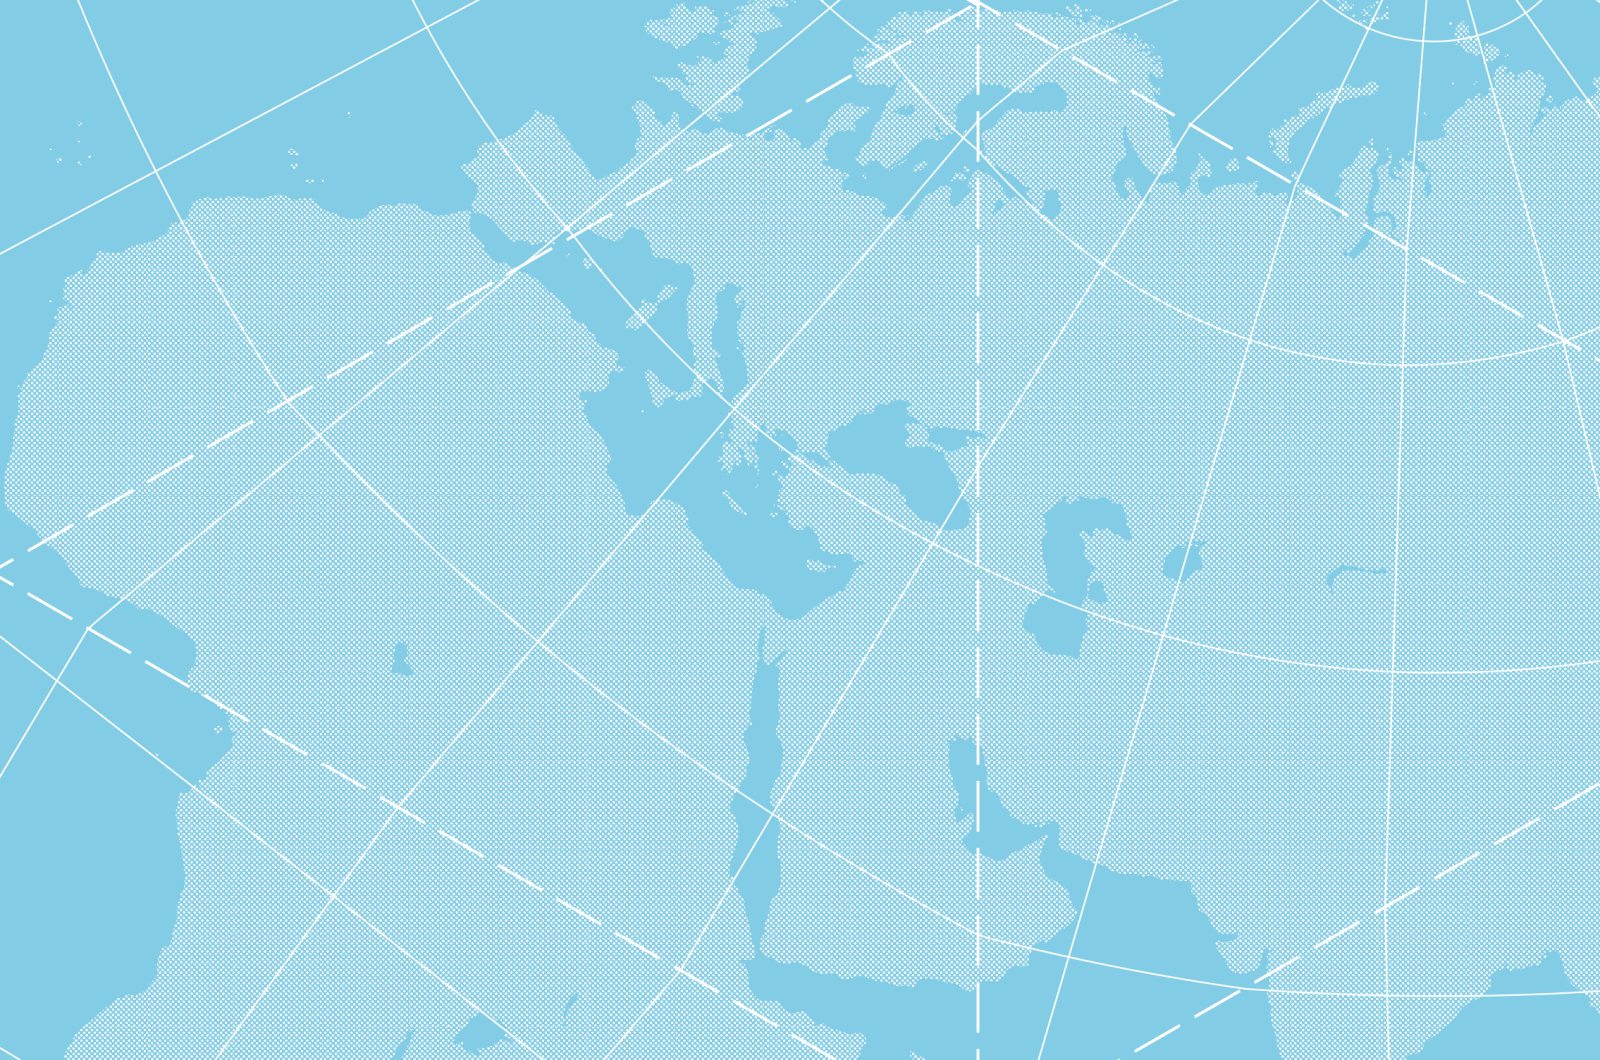 Map of the world graphic with blue background